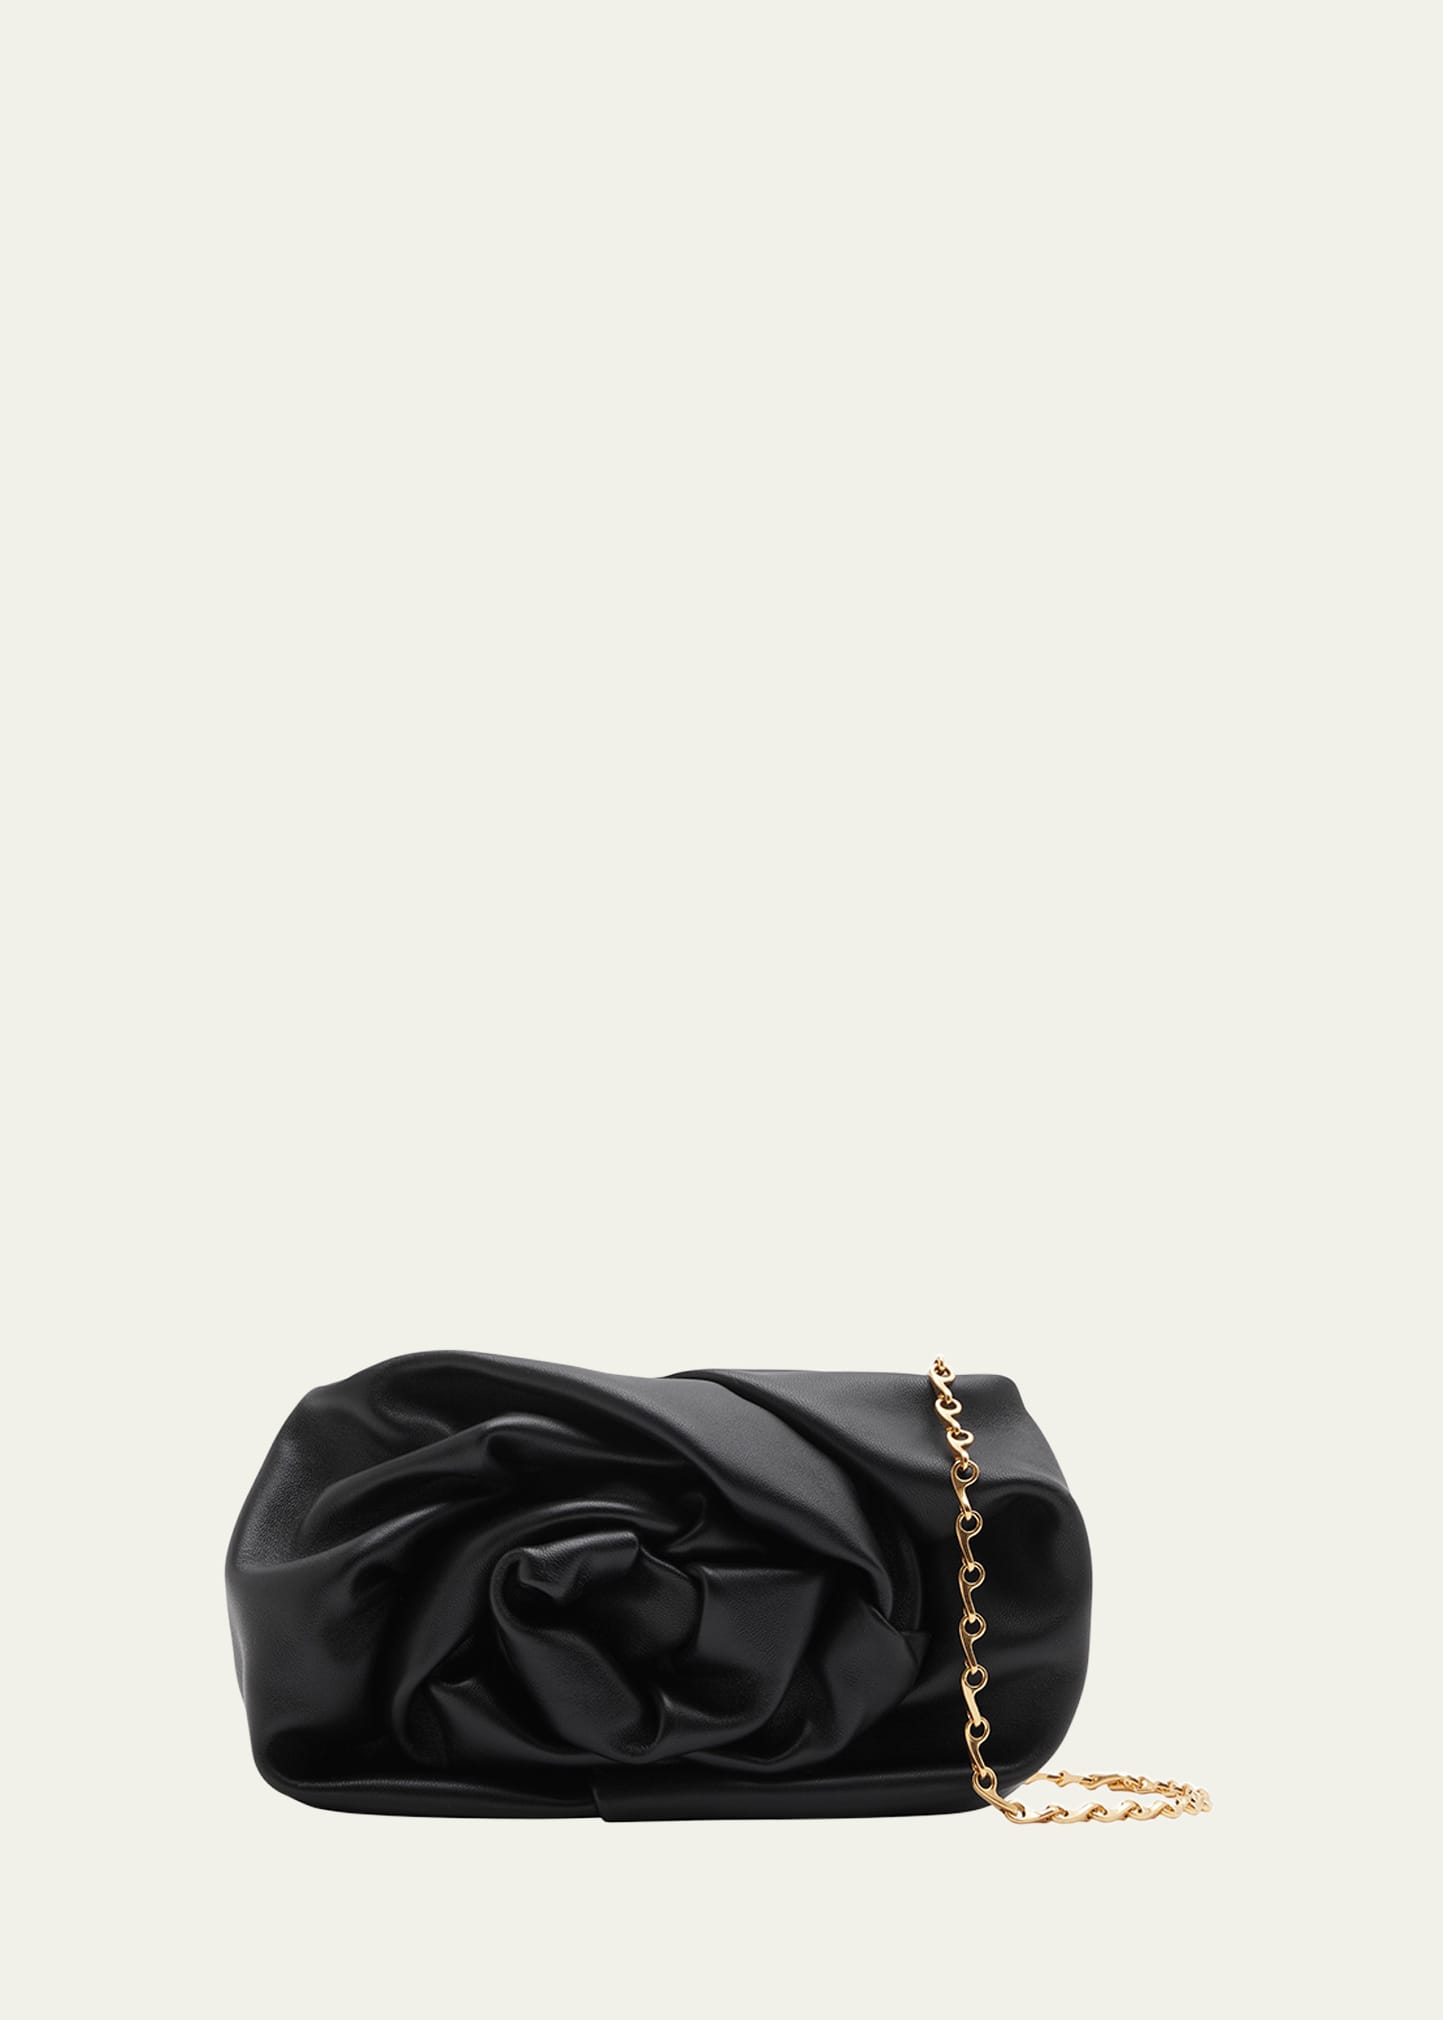 Burberry Rose Soft Leather Clutch Bag With Chain Strap In Black